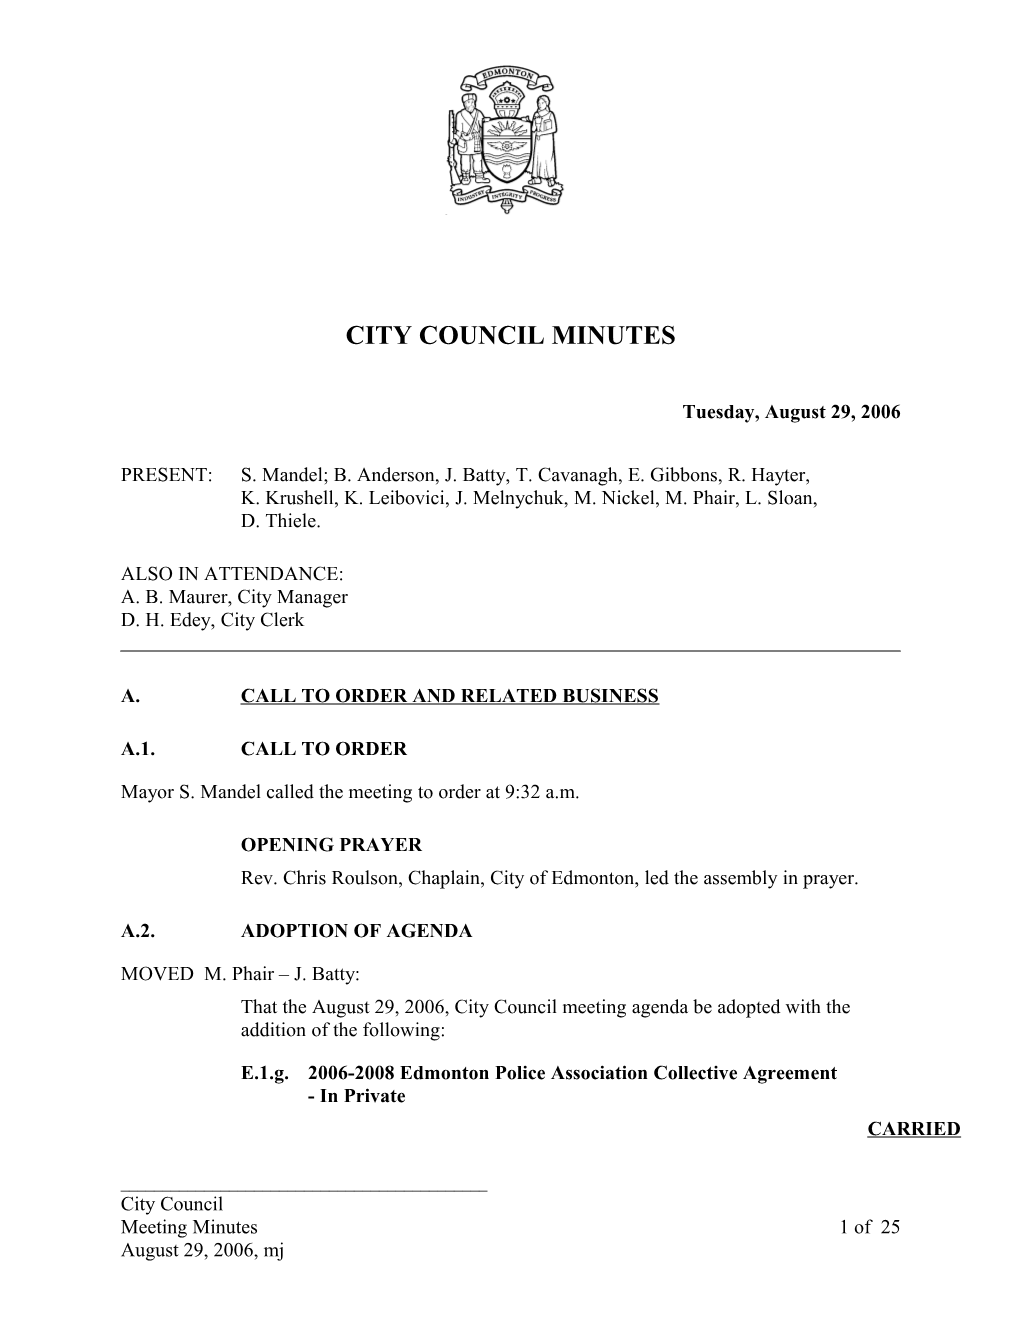 Minutes for City Council August 29, 2006 Meeting